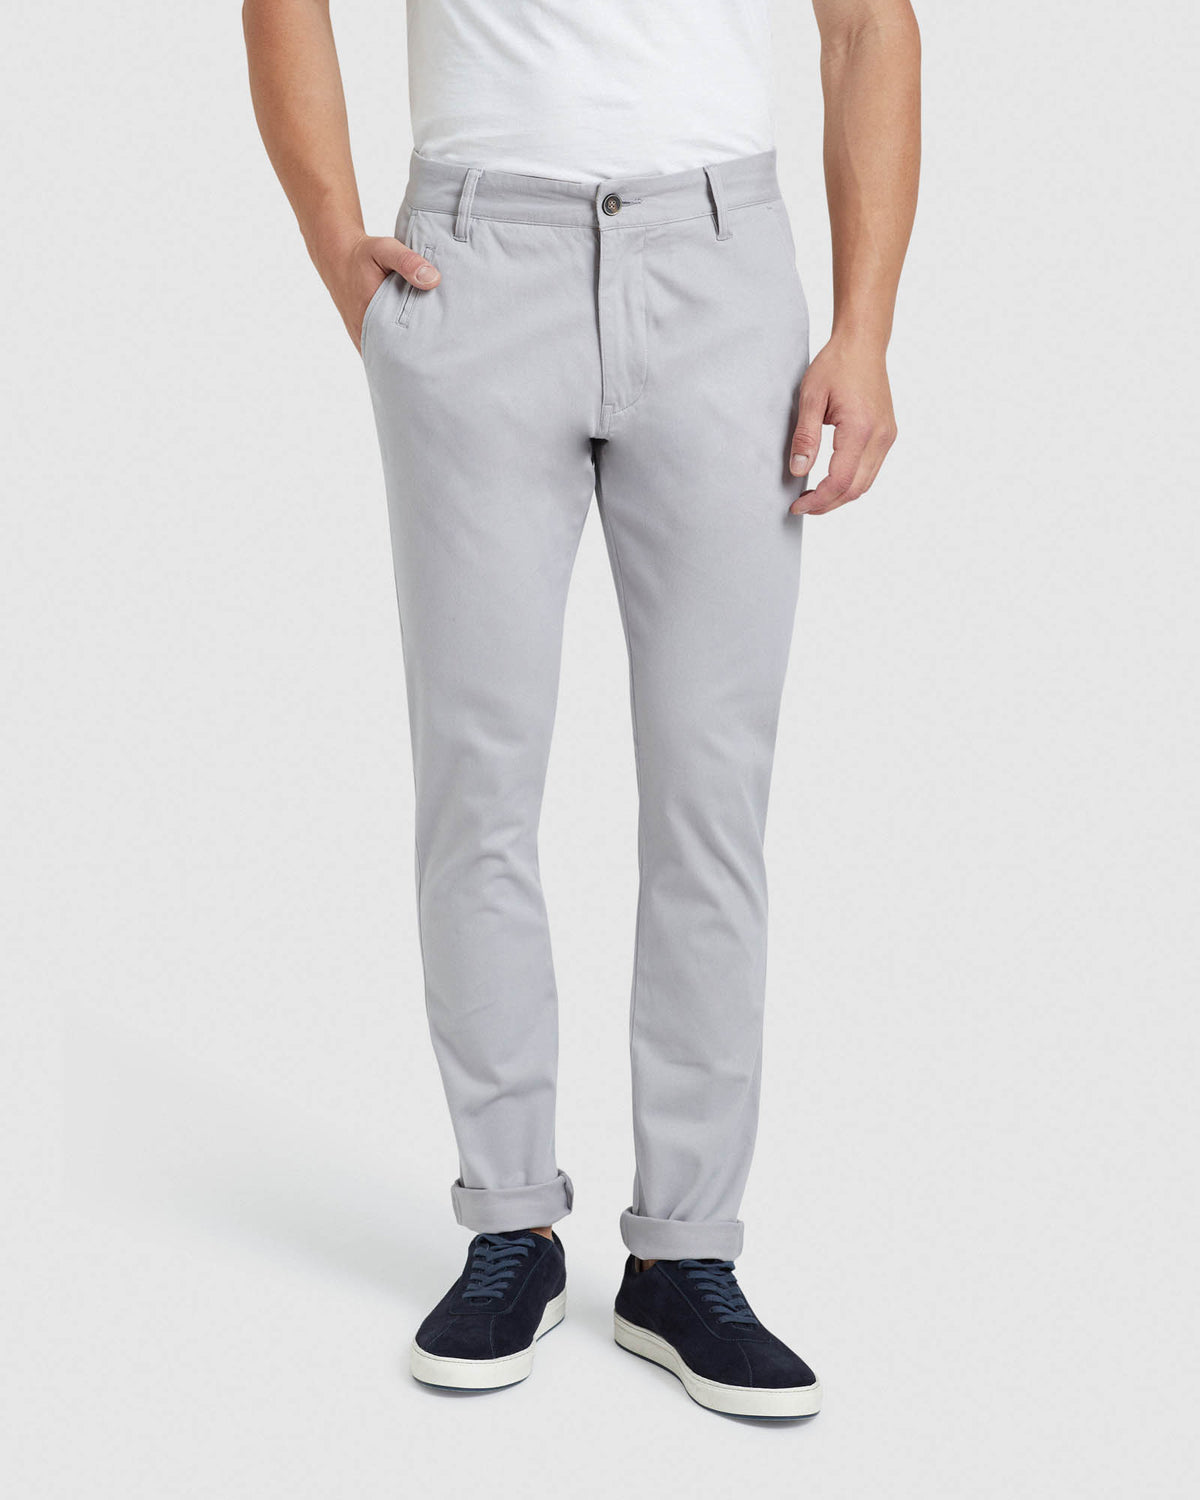 STRETCH ORGANIC COTTON SKINNY CHINOS MENS TROUSERS